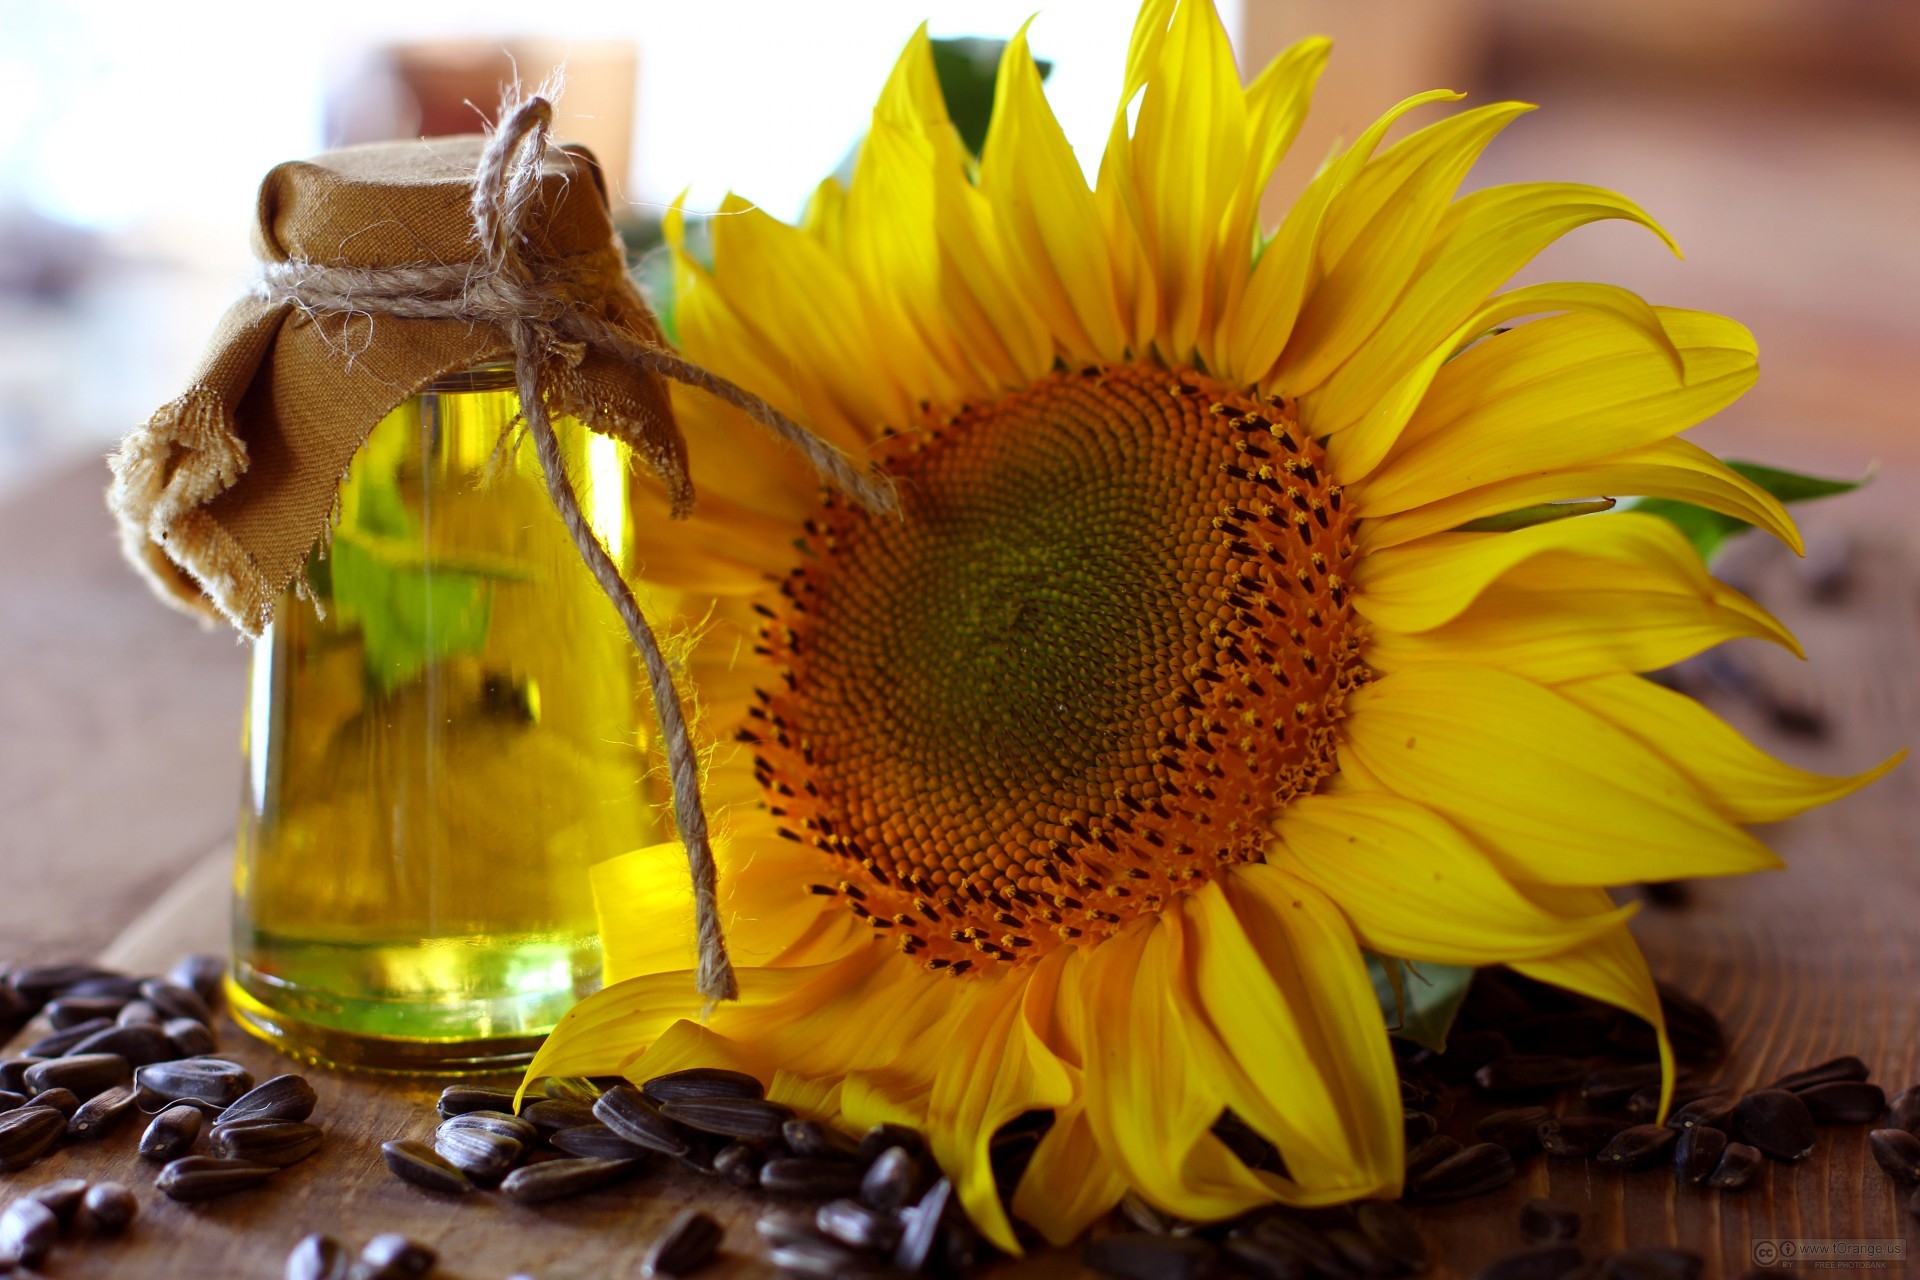 Sunflower oil is falling in price amid falling prices for palm and soybean oil